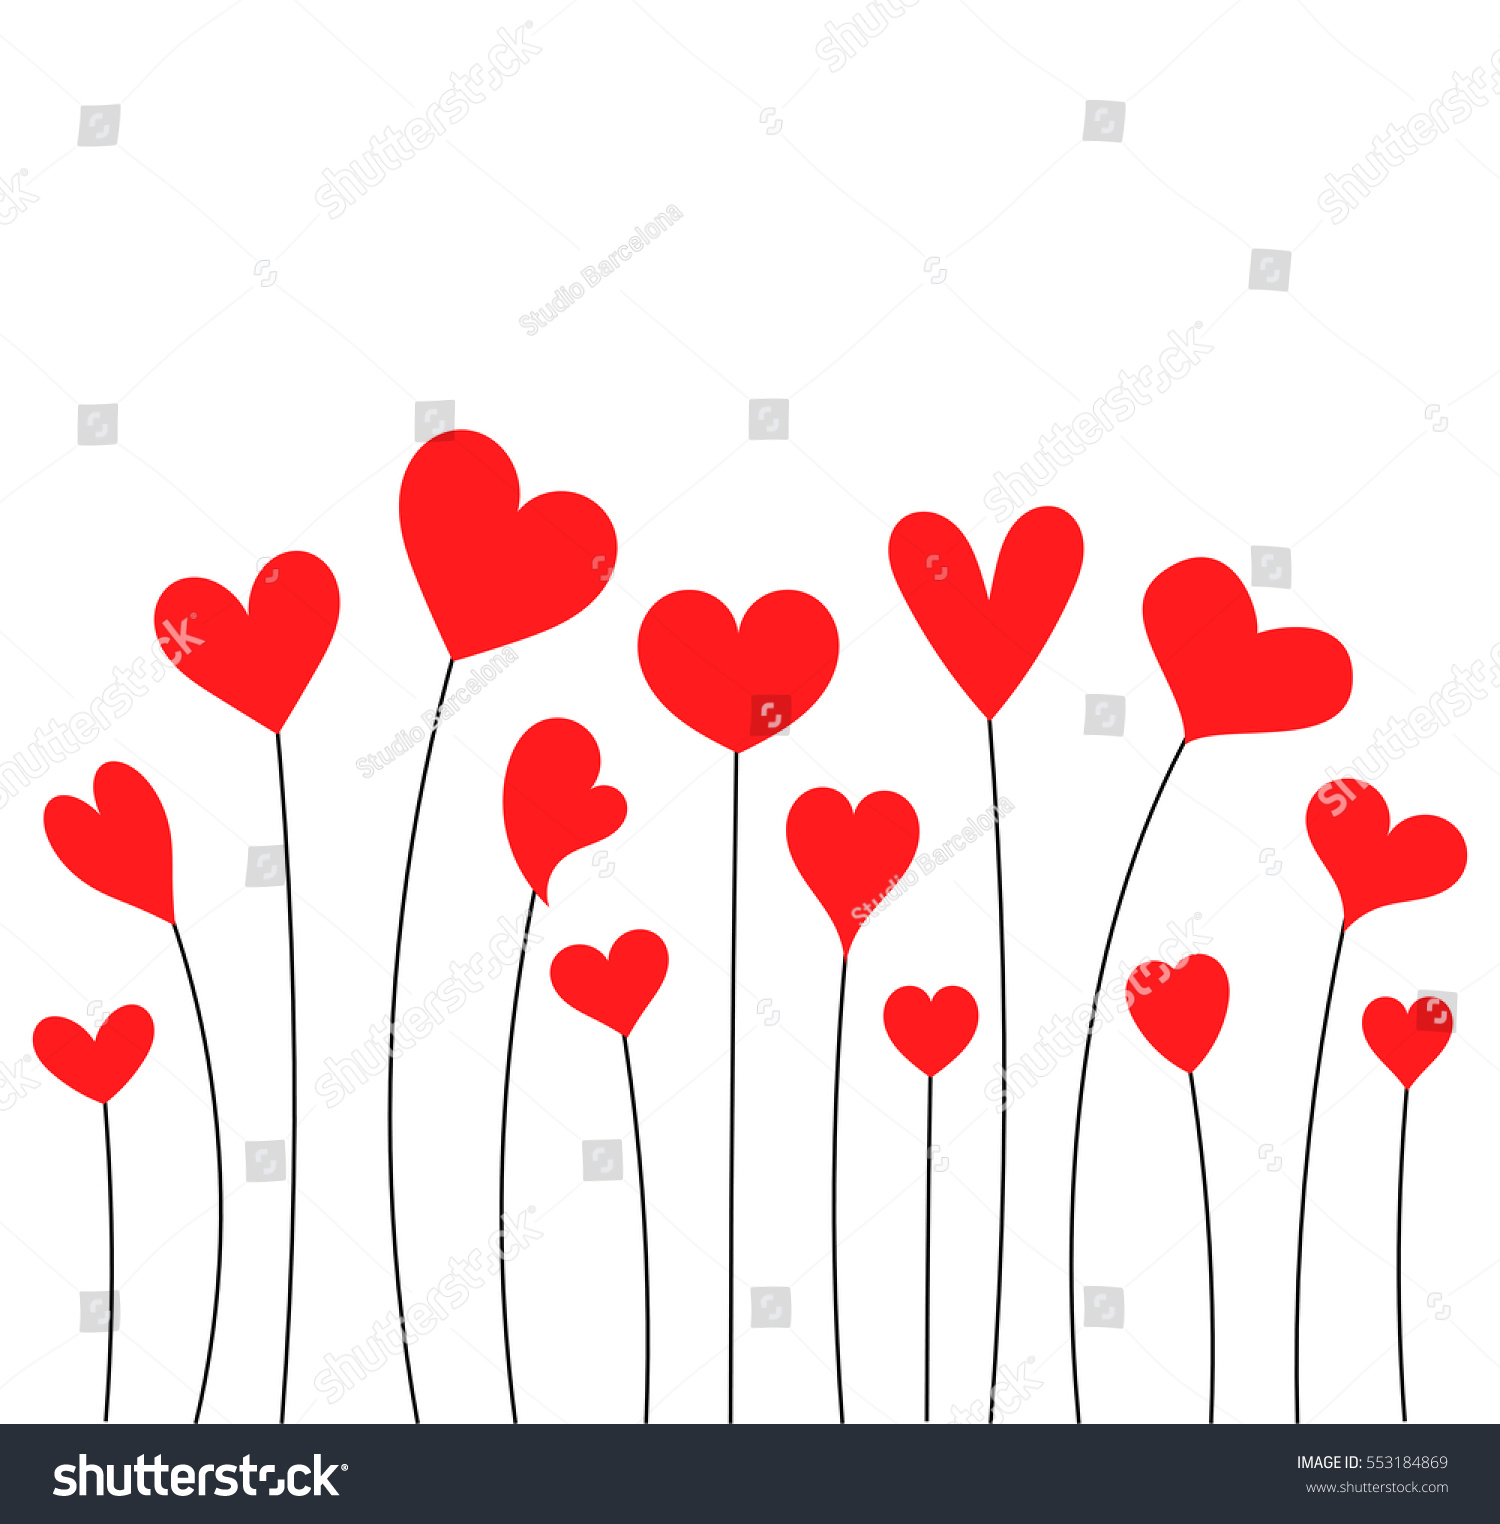 Cute Red Hearts Valentines Day Background Stock Vector (Royalty Free ...